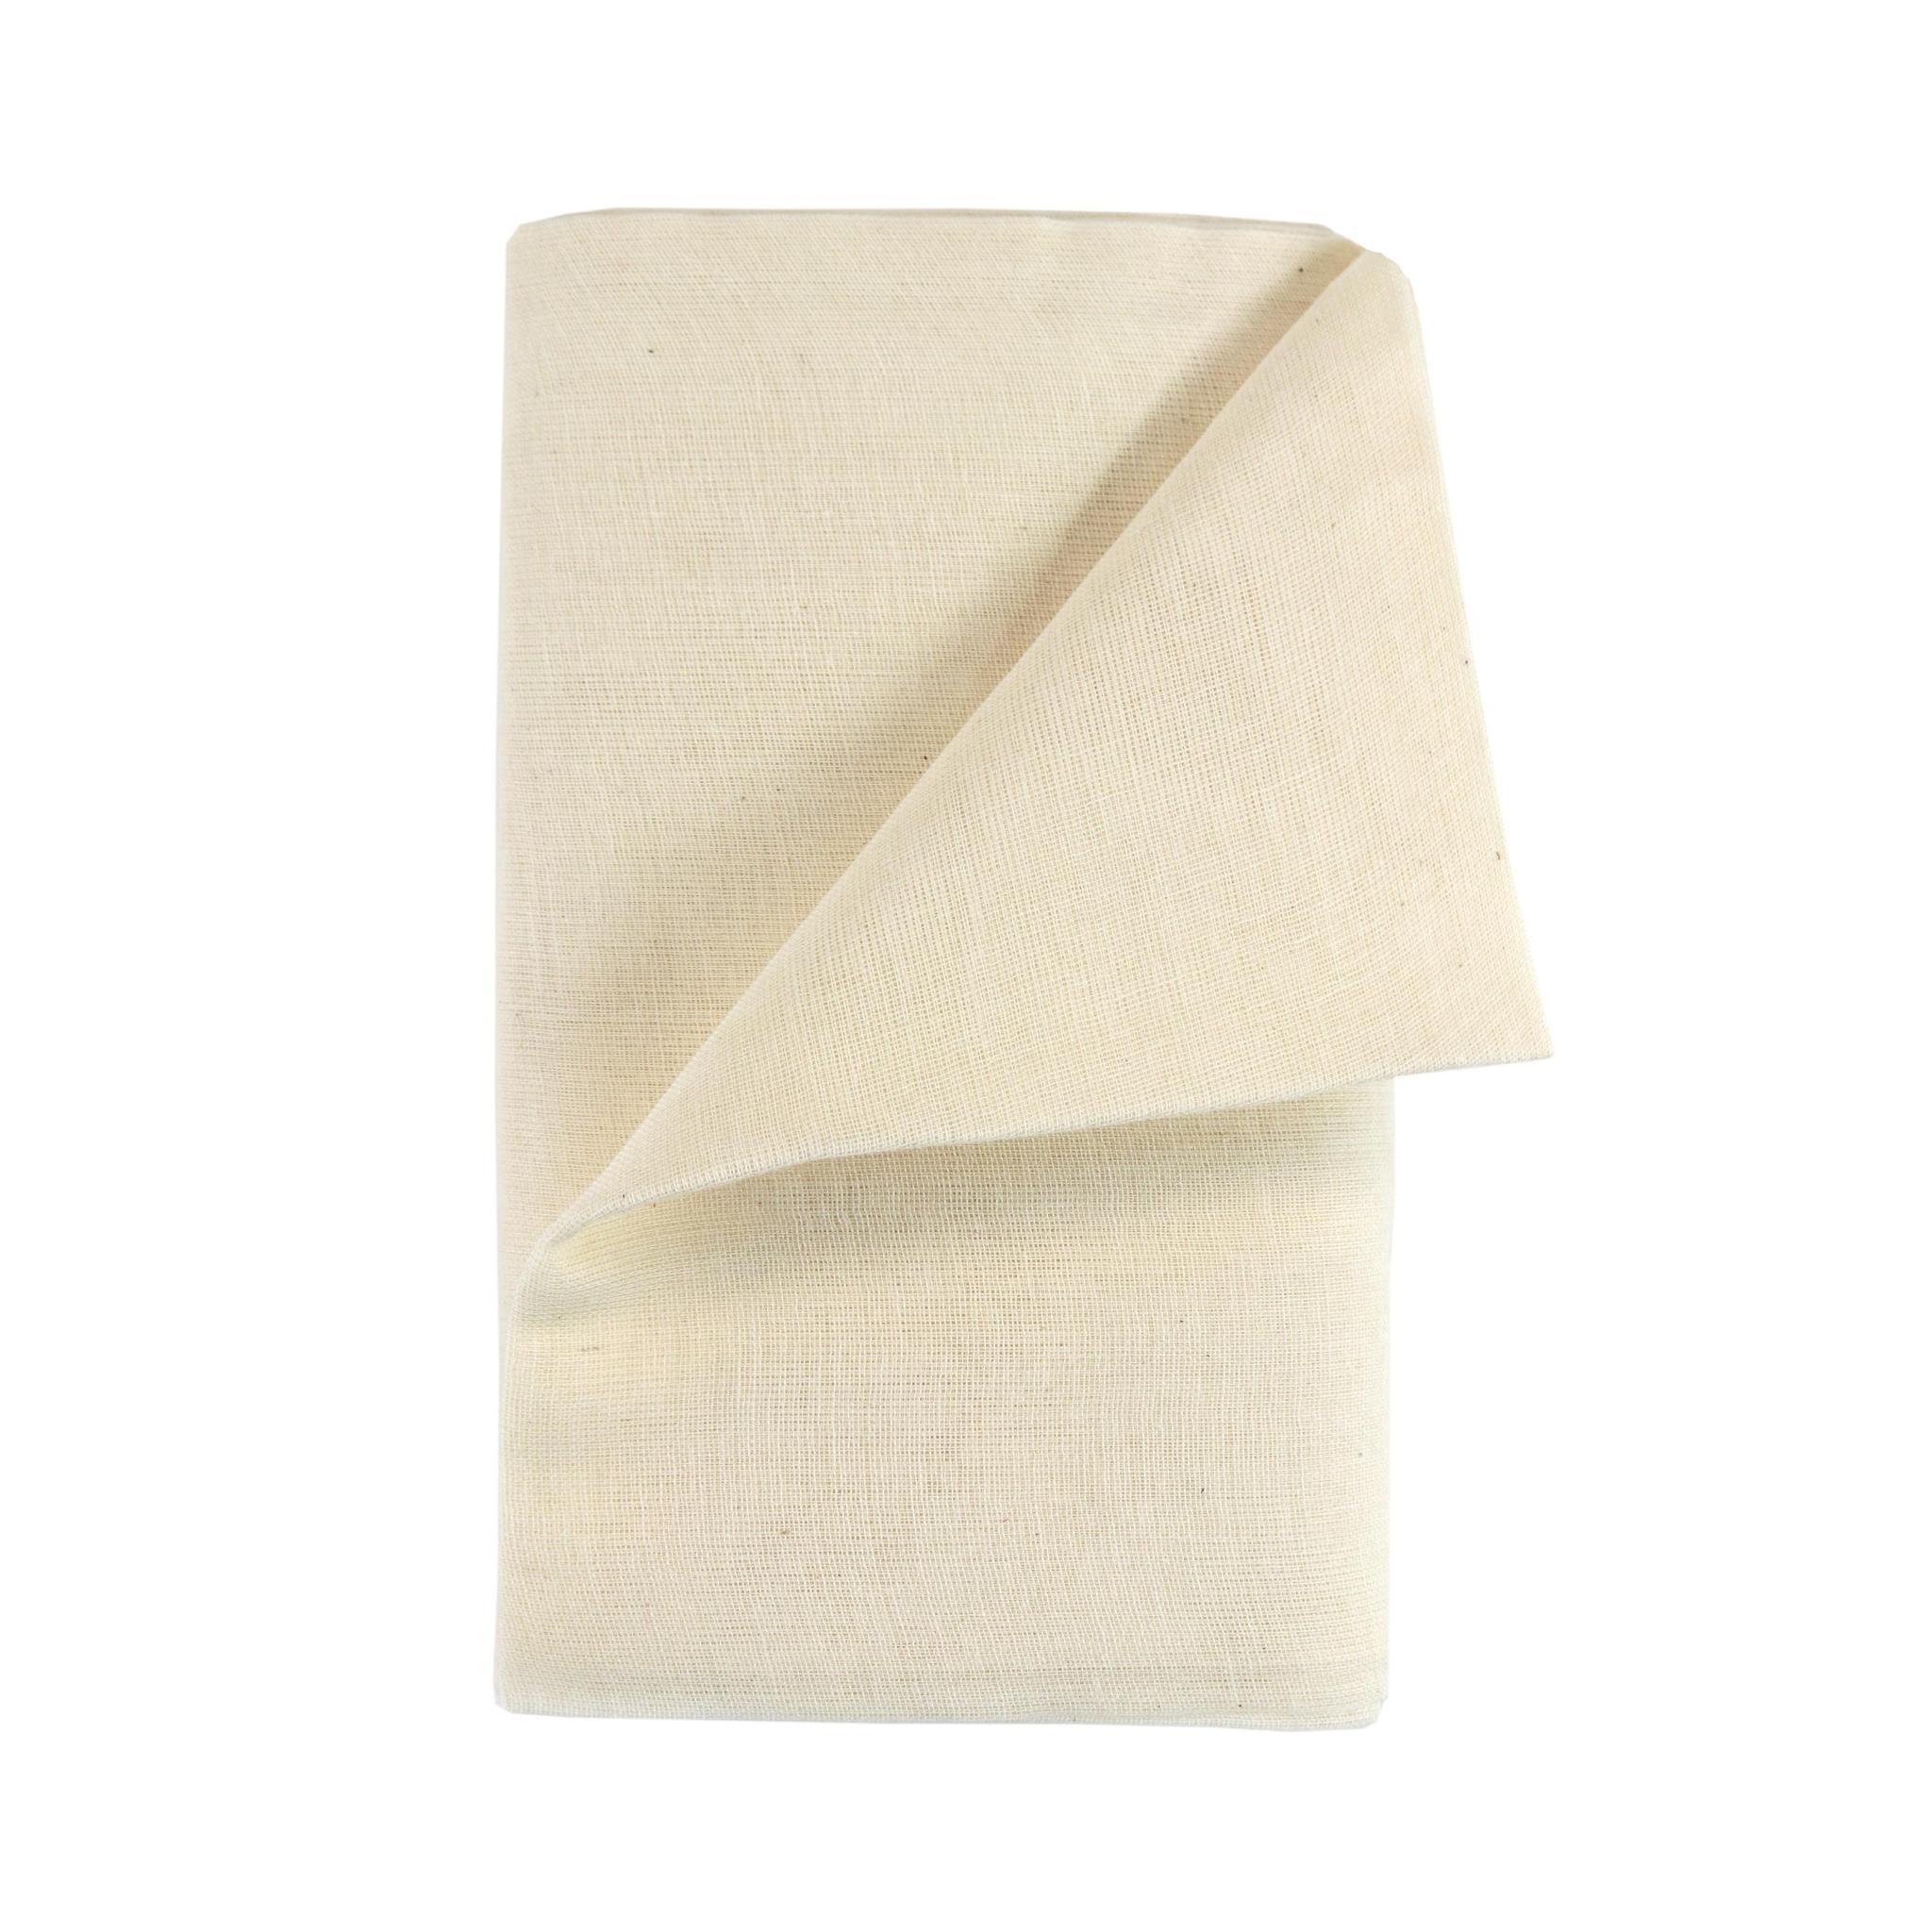  Cheesecloth - Unbleached Natural Cotton Cloth - Best